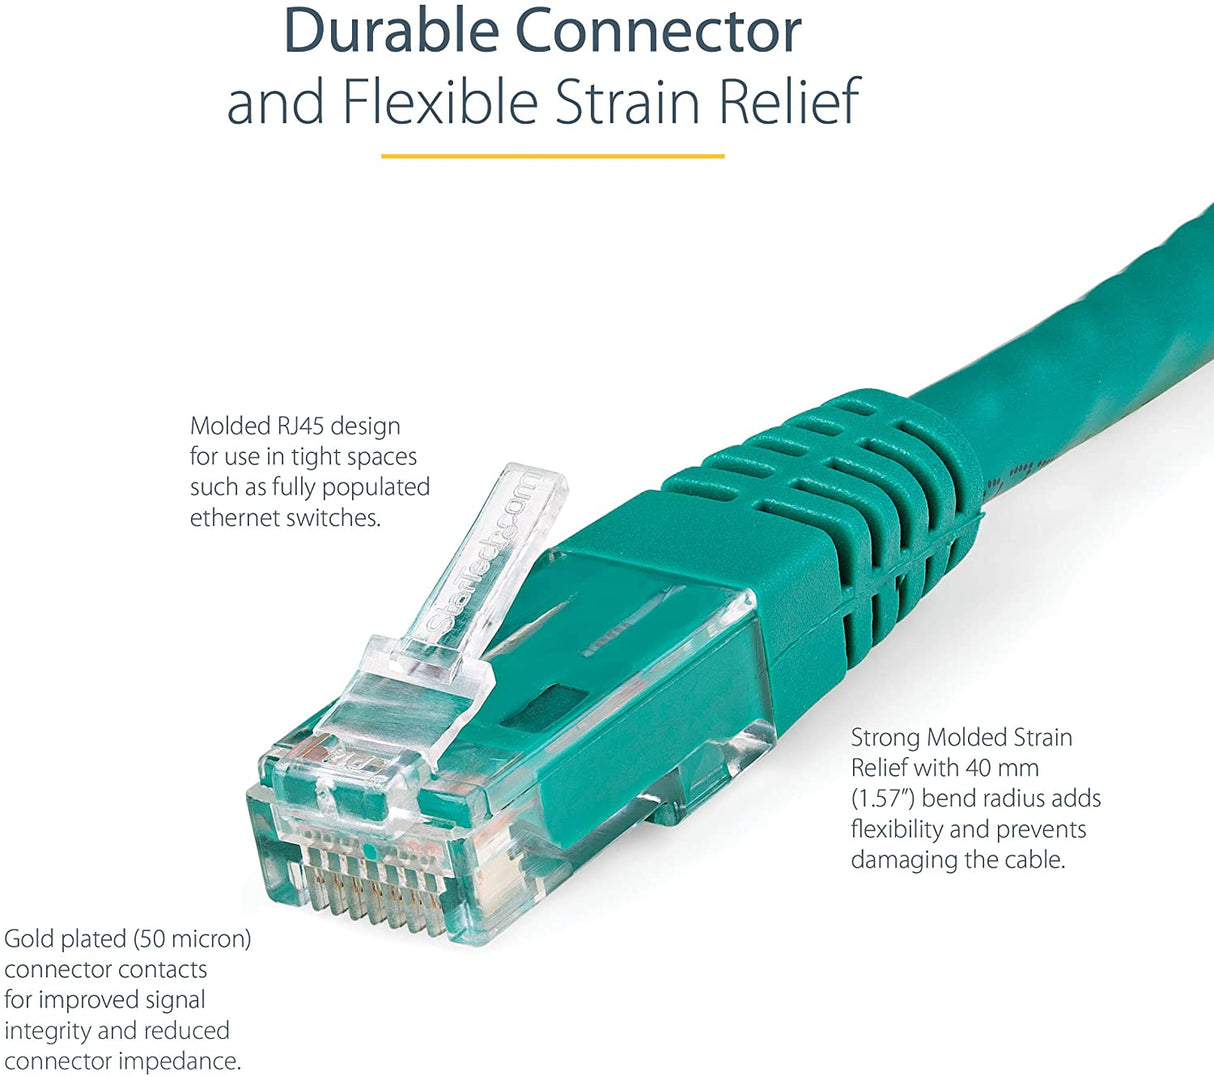 StarTech.com 10ft CAT6 Ethernet Cable - Green CAT 6 Gigabit Ethernet Wire -650MHz 100W PoE++ RJ45 UTP Molded Category 6 Network/Patch Cord w/Strain Relief/Fluke Tested UL/TIA Certified (C6PATCH10GN) Green 10 ft / 3m 1 Pack